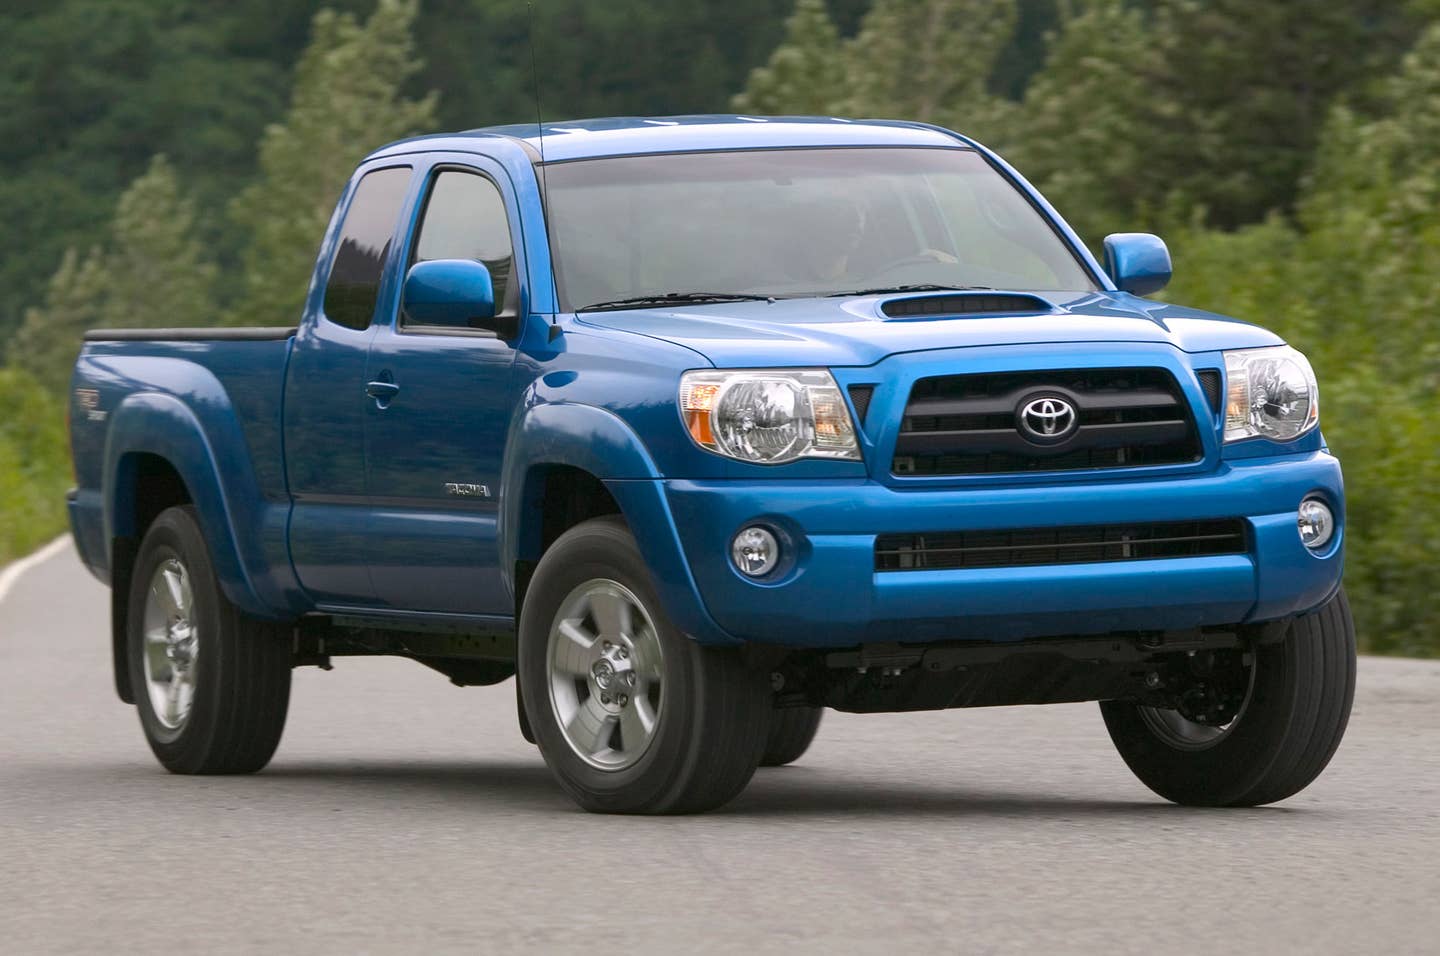 message-editor%2F1554047327952-2005-toyota-tacoma-front-side-view.jpg